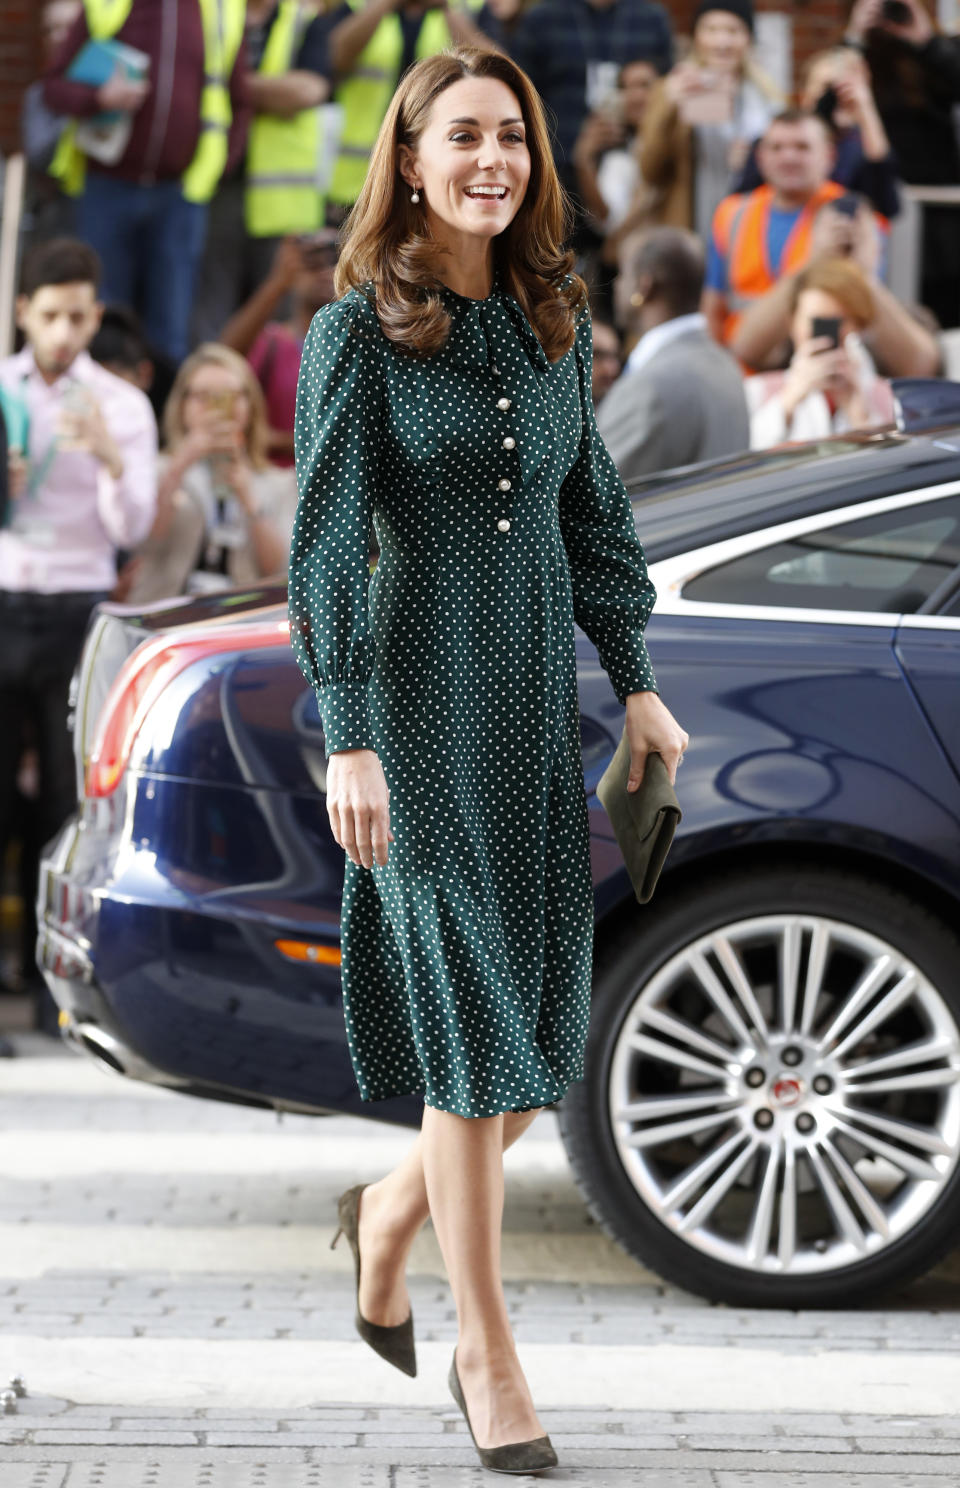 The Duchess of Cambridge arrives for a visit to Evelina Children’s Hospital in London in a dress by LK Bennett (Chris Jackson/PA)